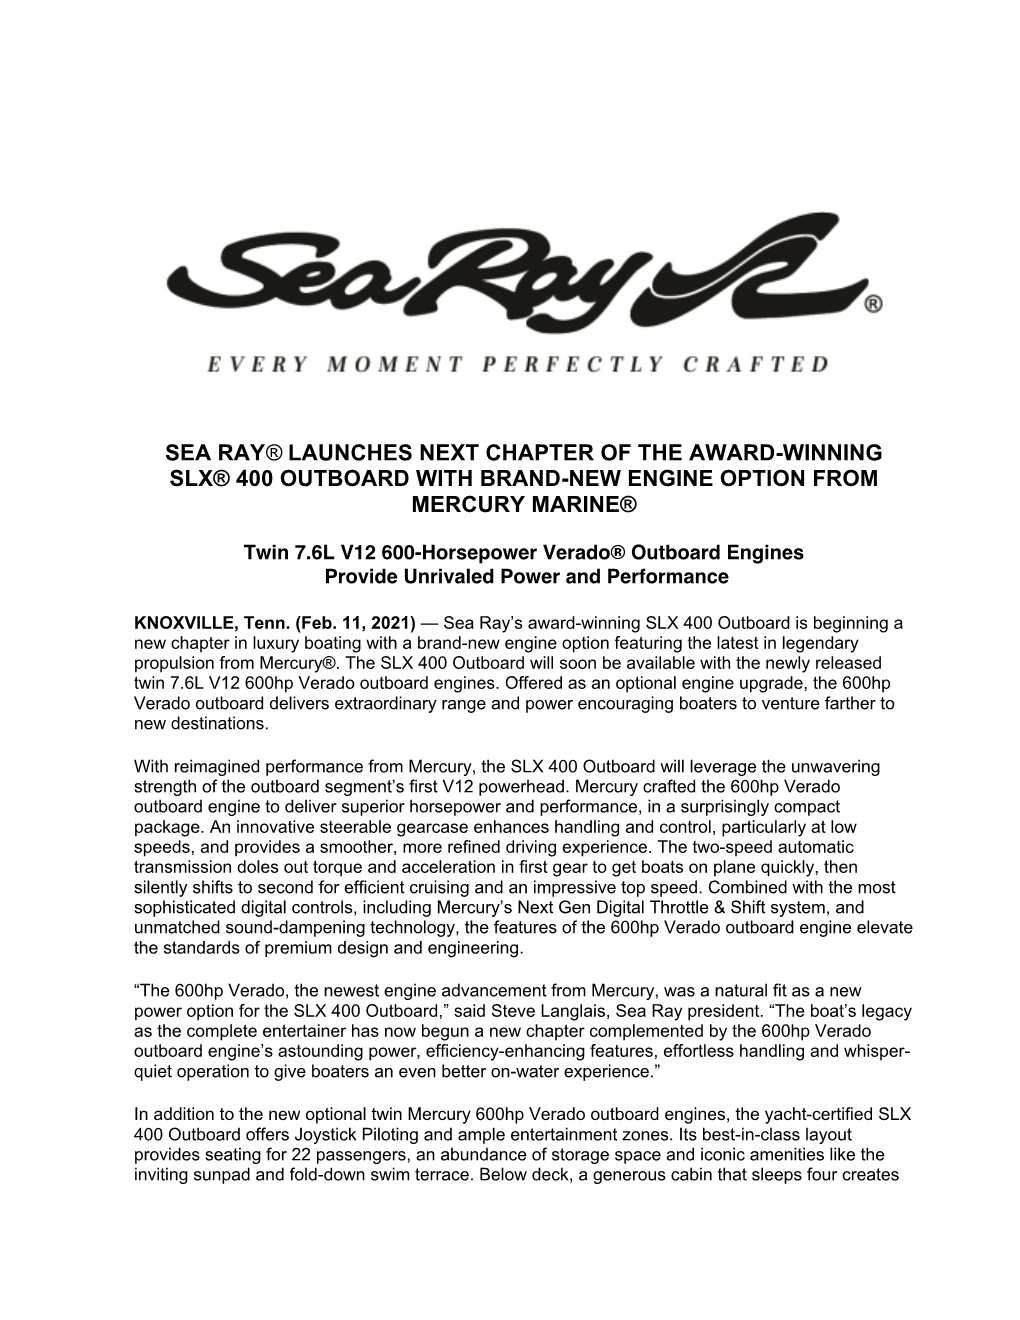 Sea Ray® Launches Next Chapter of the Award-Winning Slx® 400 Outboard with Brand-New Engine Option from Mercury Marine®